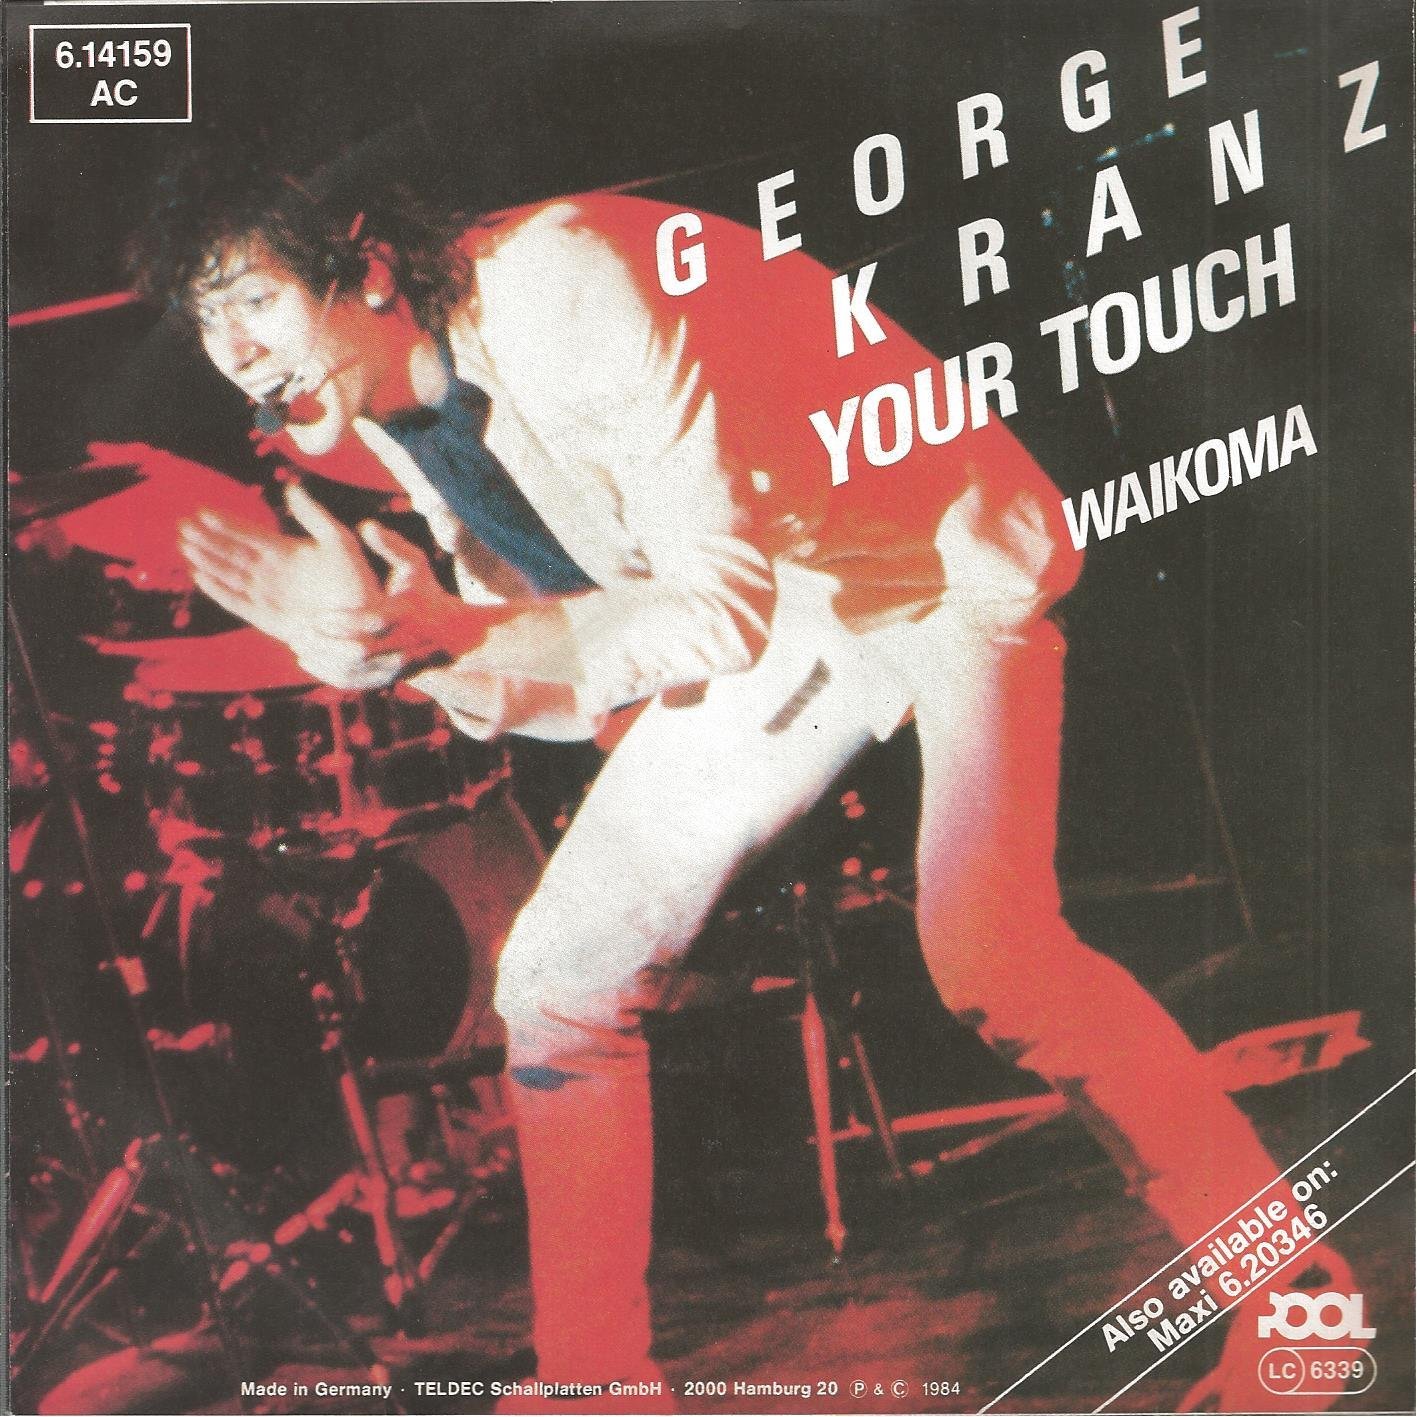 georgekranz your touch